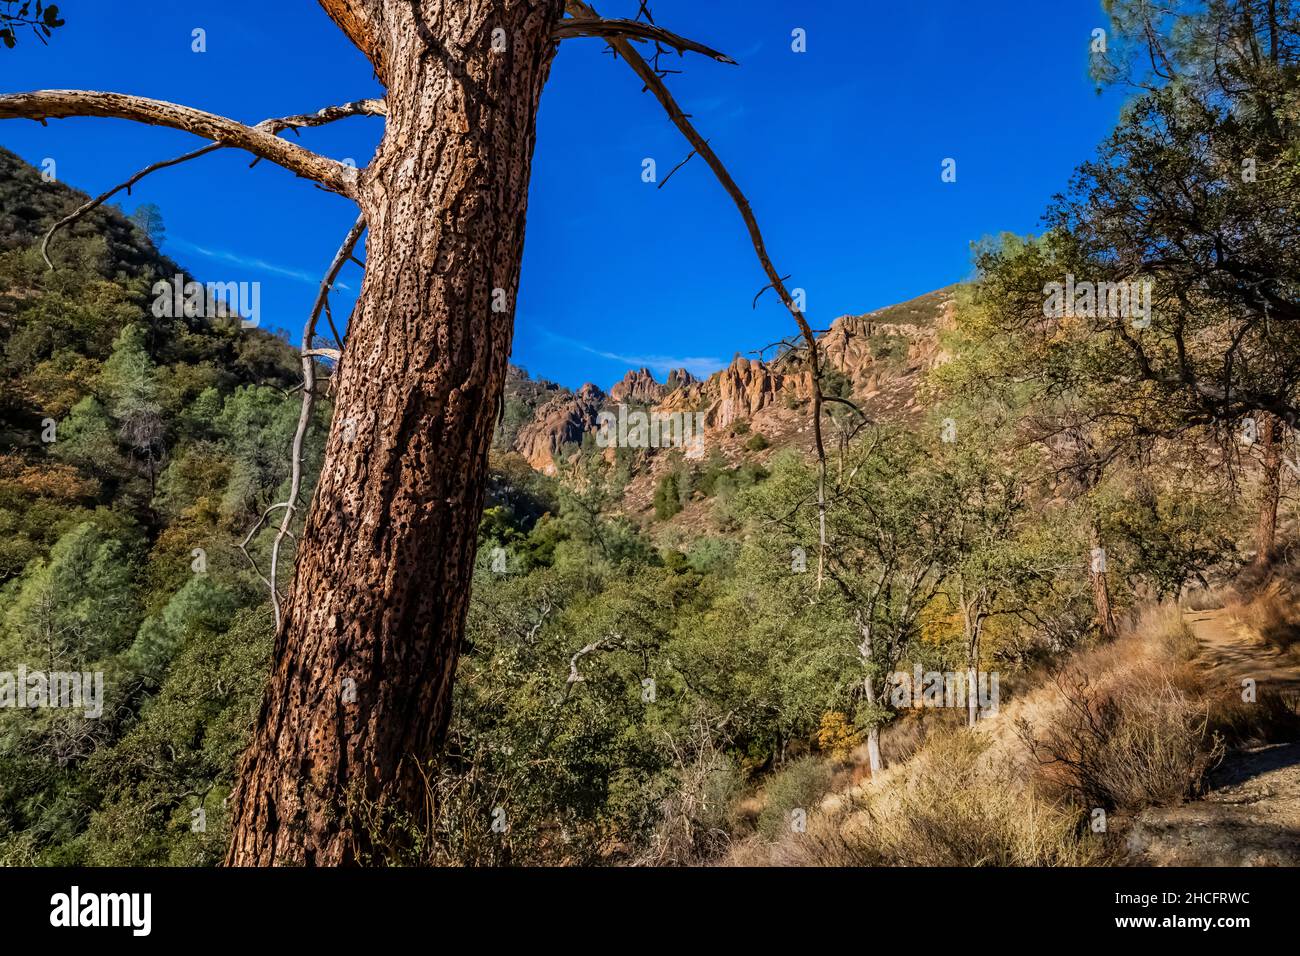 Acorn Woodpecker, Melanerpes formicivorus, granary tree with stored acorns and High Peaks behind in Pinnacles National Park, California, USA Stock Photo